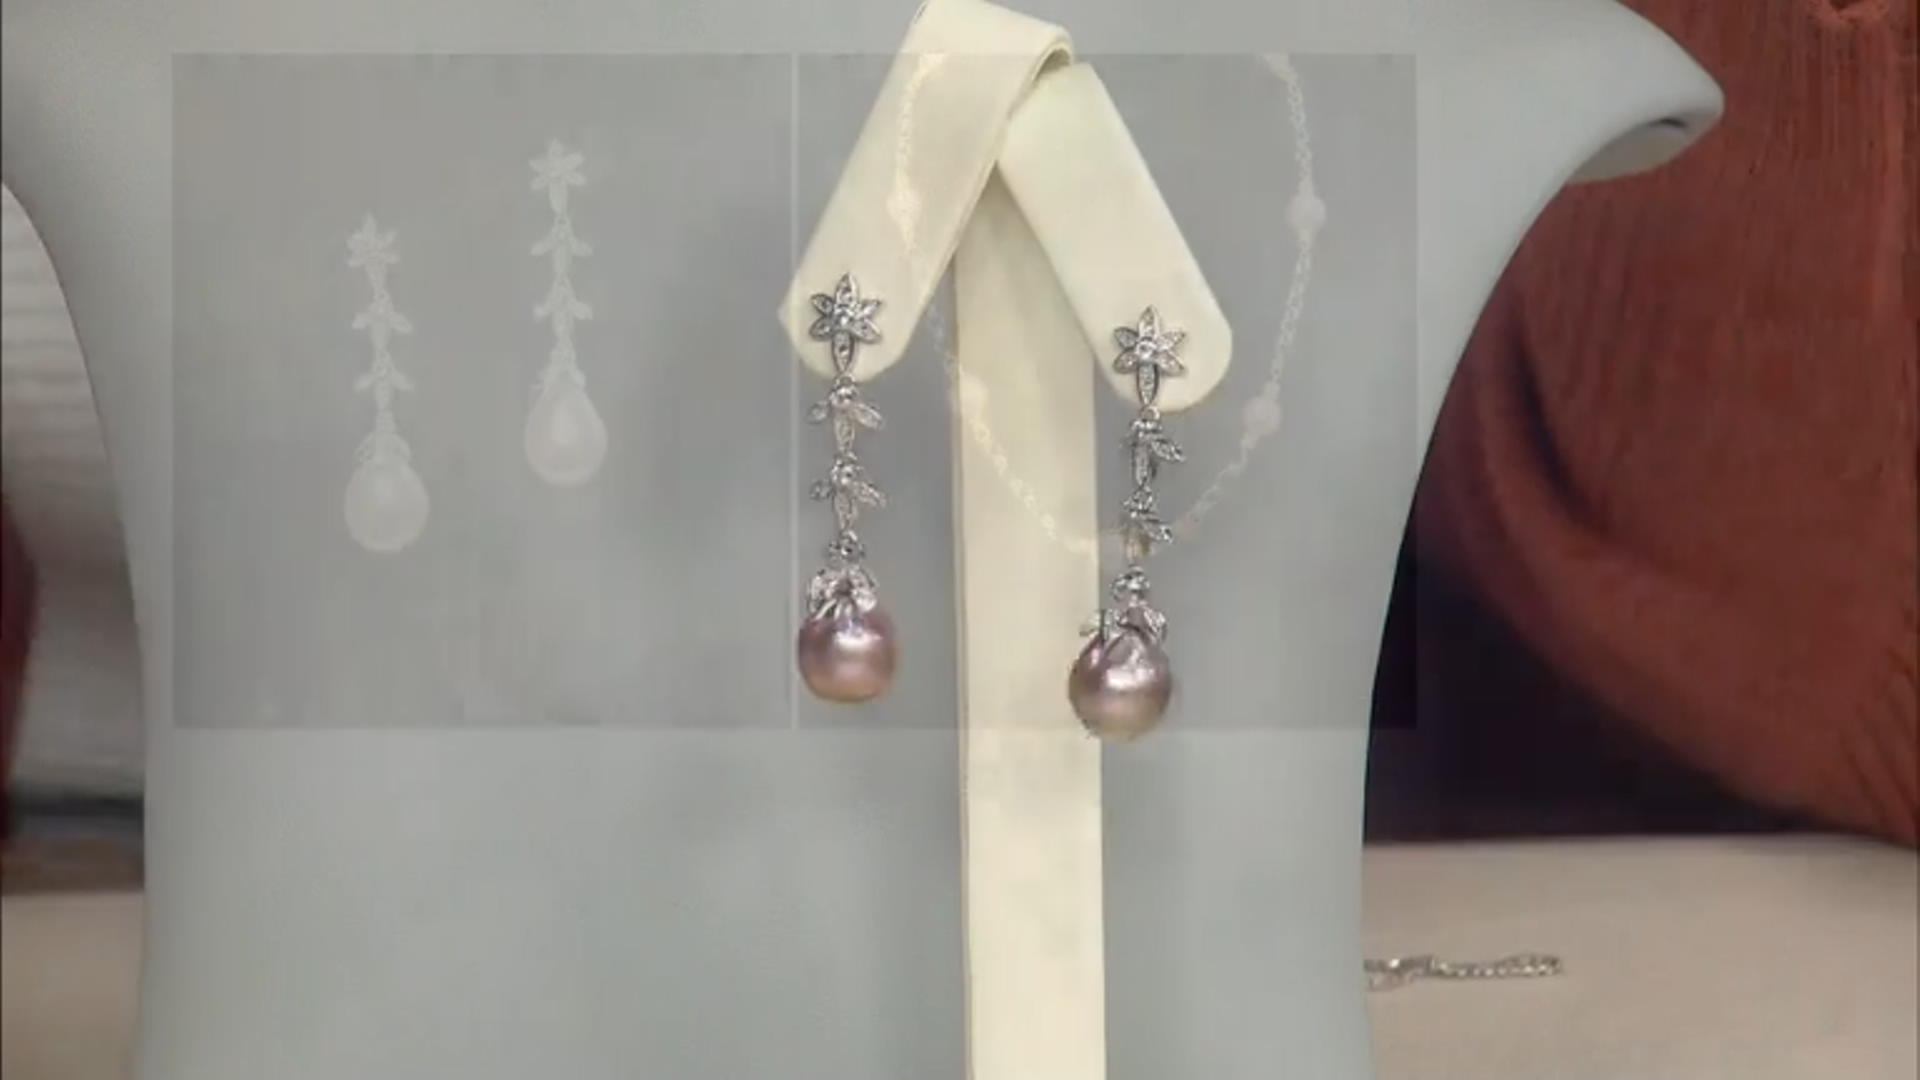 Cultured Kasumiga Pearl & White Topaz Rhodium Over Sterling Silver Drop Earrings Video Thumbnail